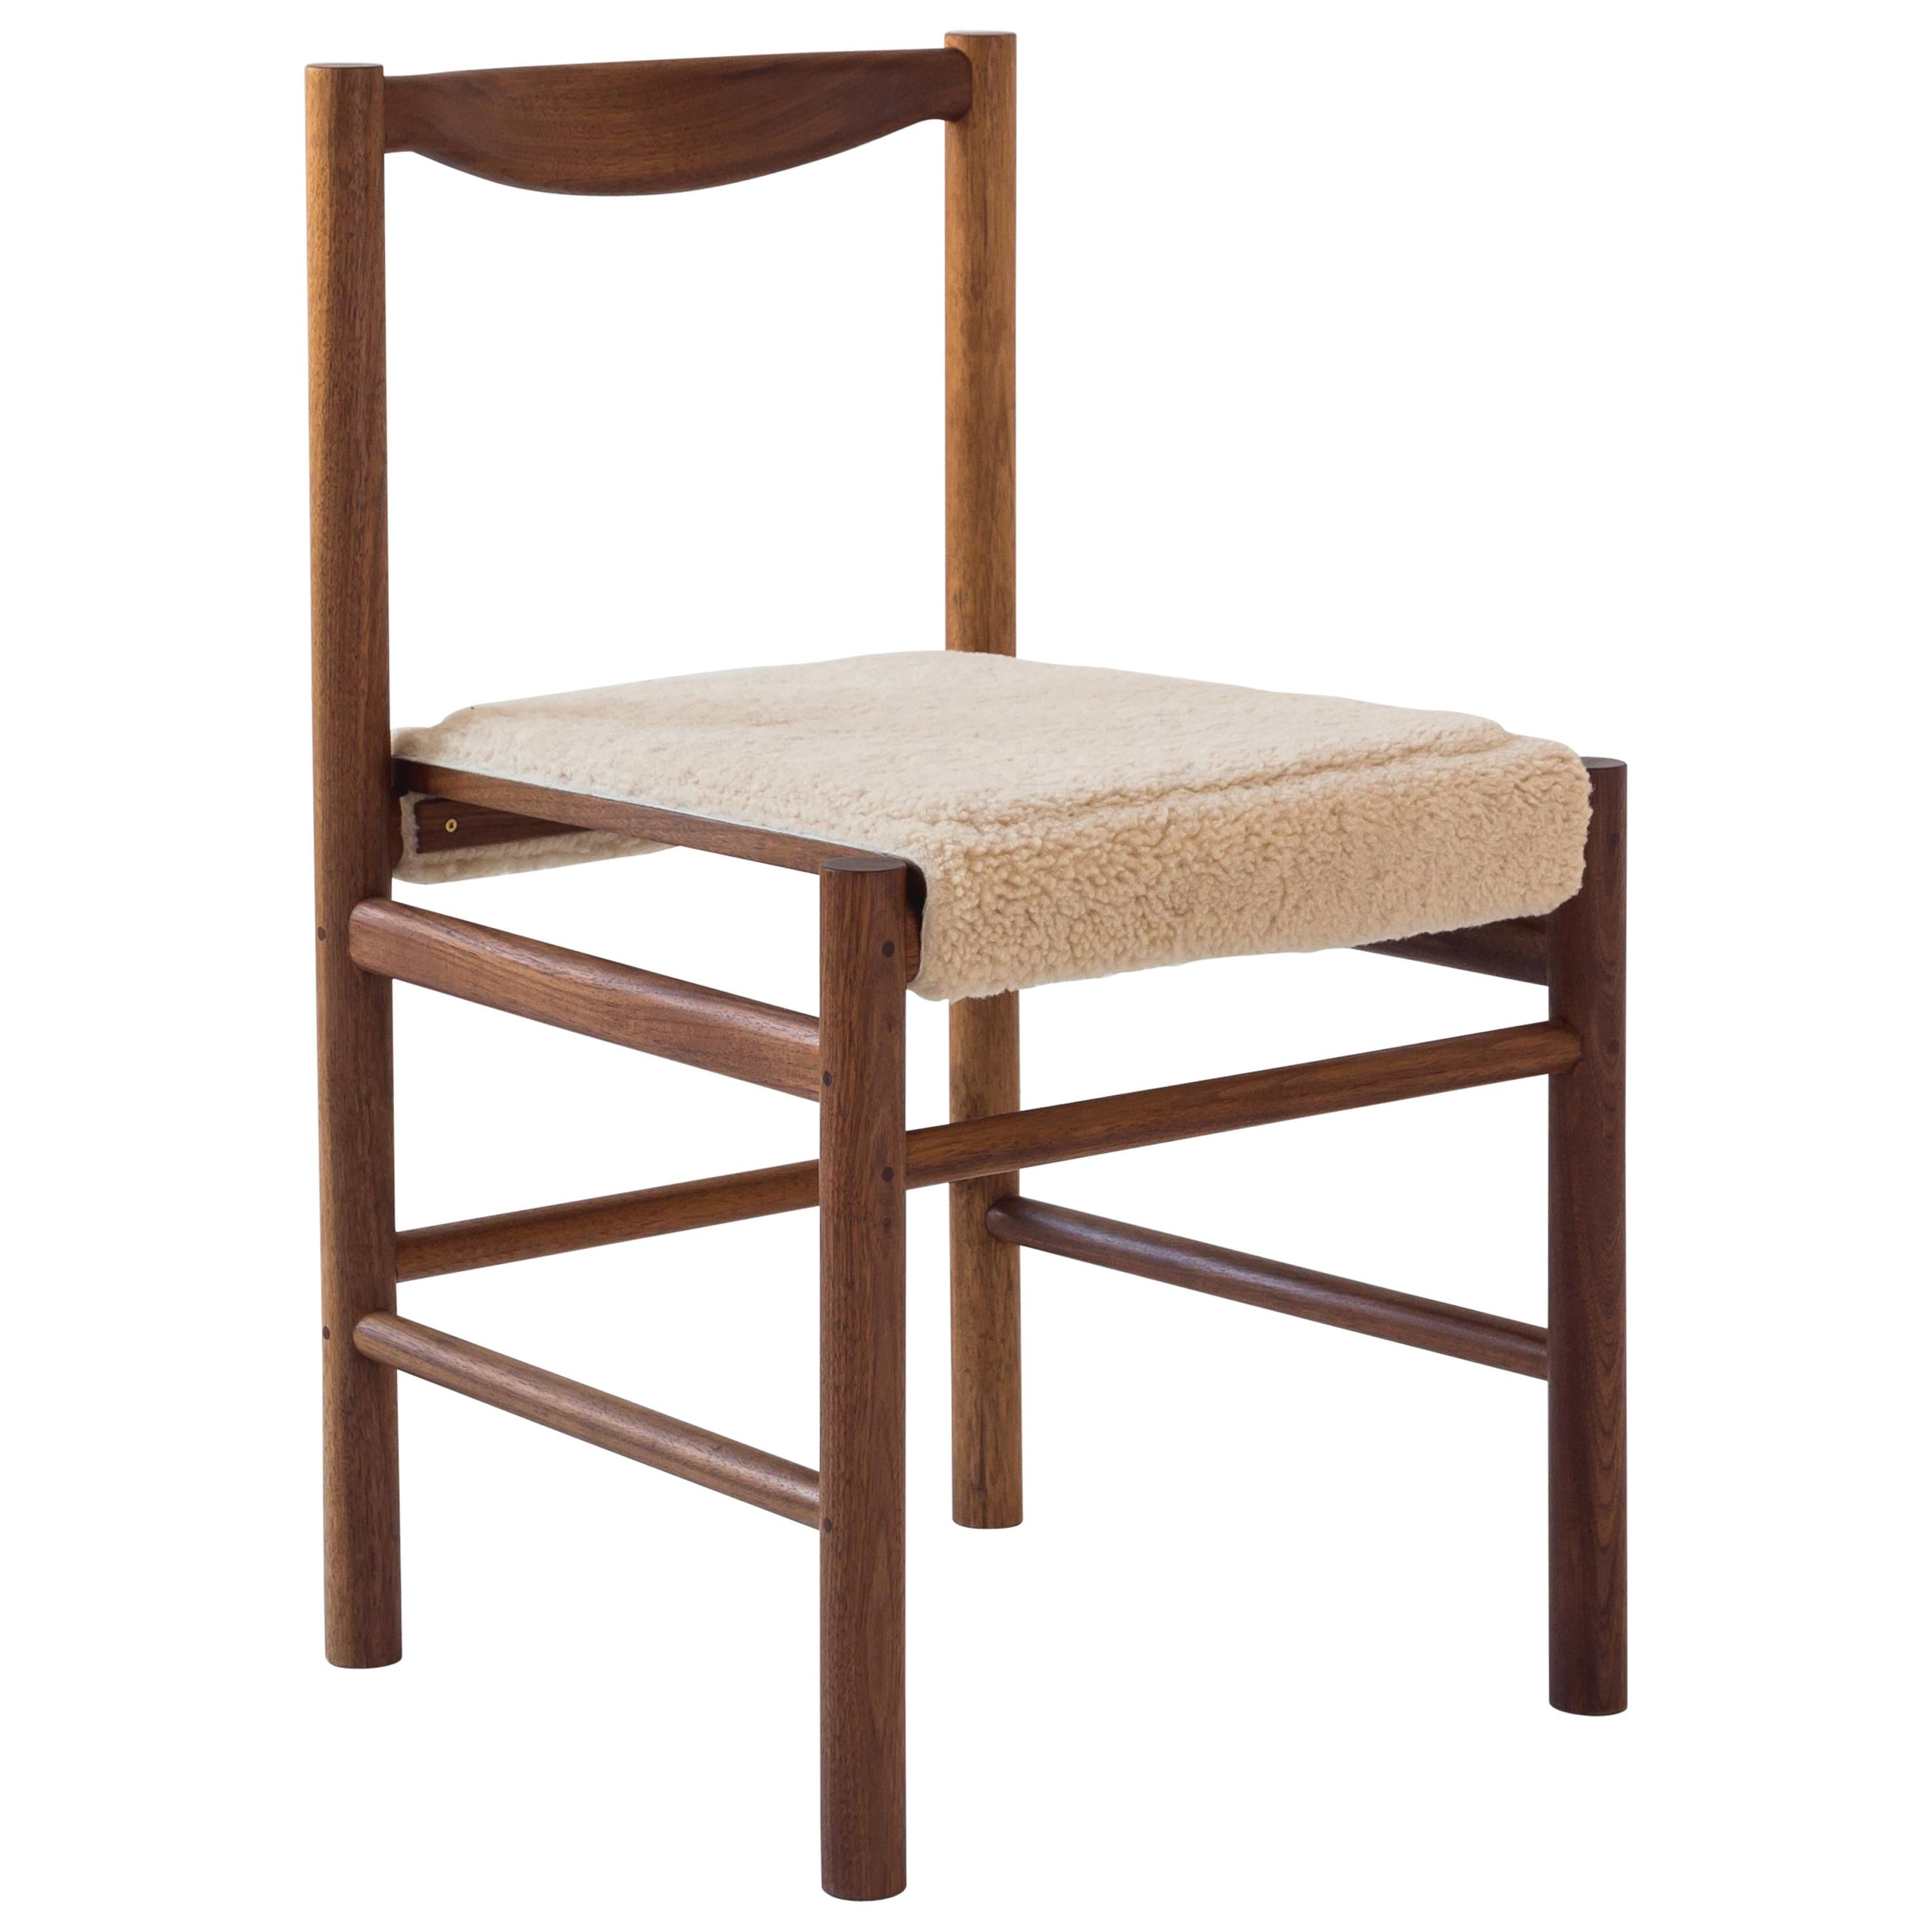 Wood Range Dining Chair in Walnut and Shearling by Fort Standard, In Stock